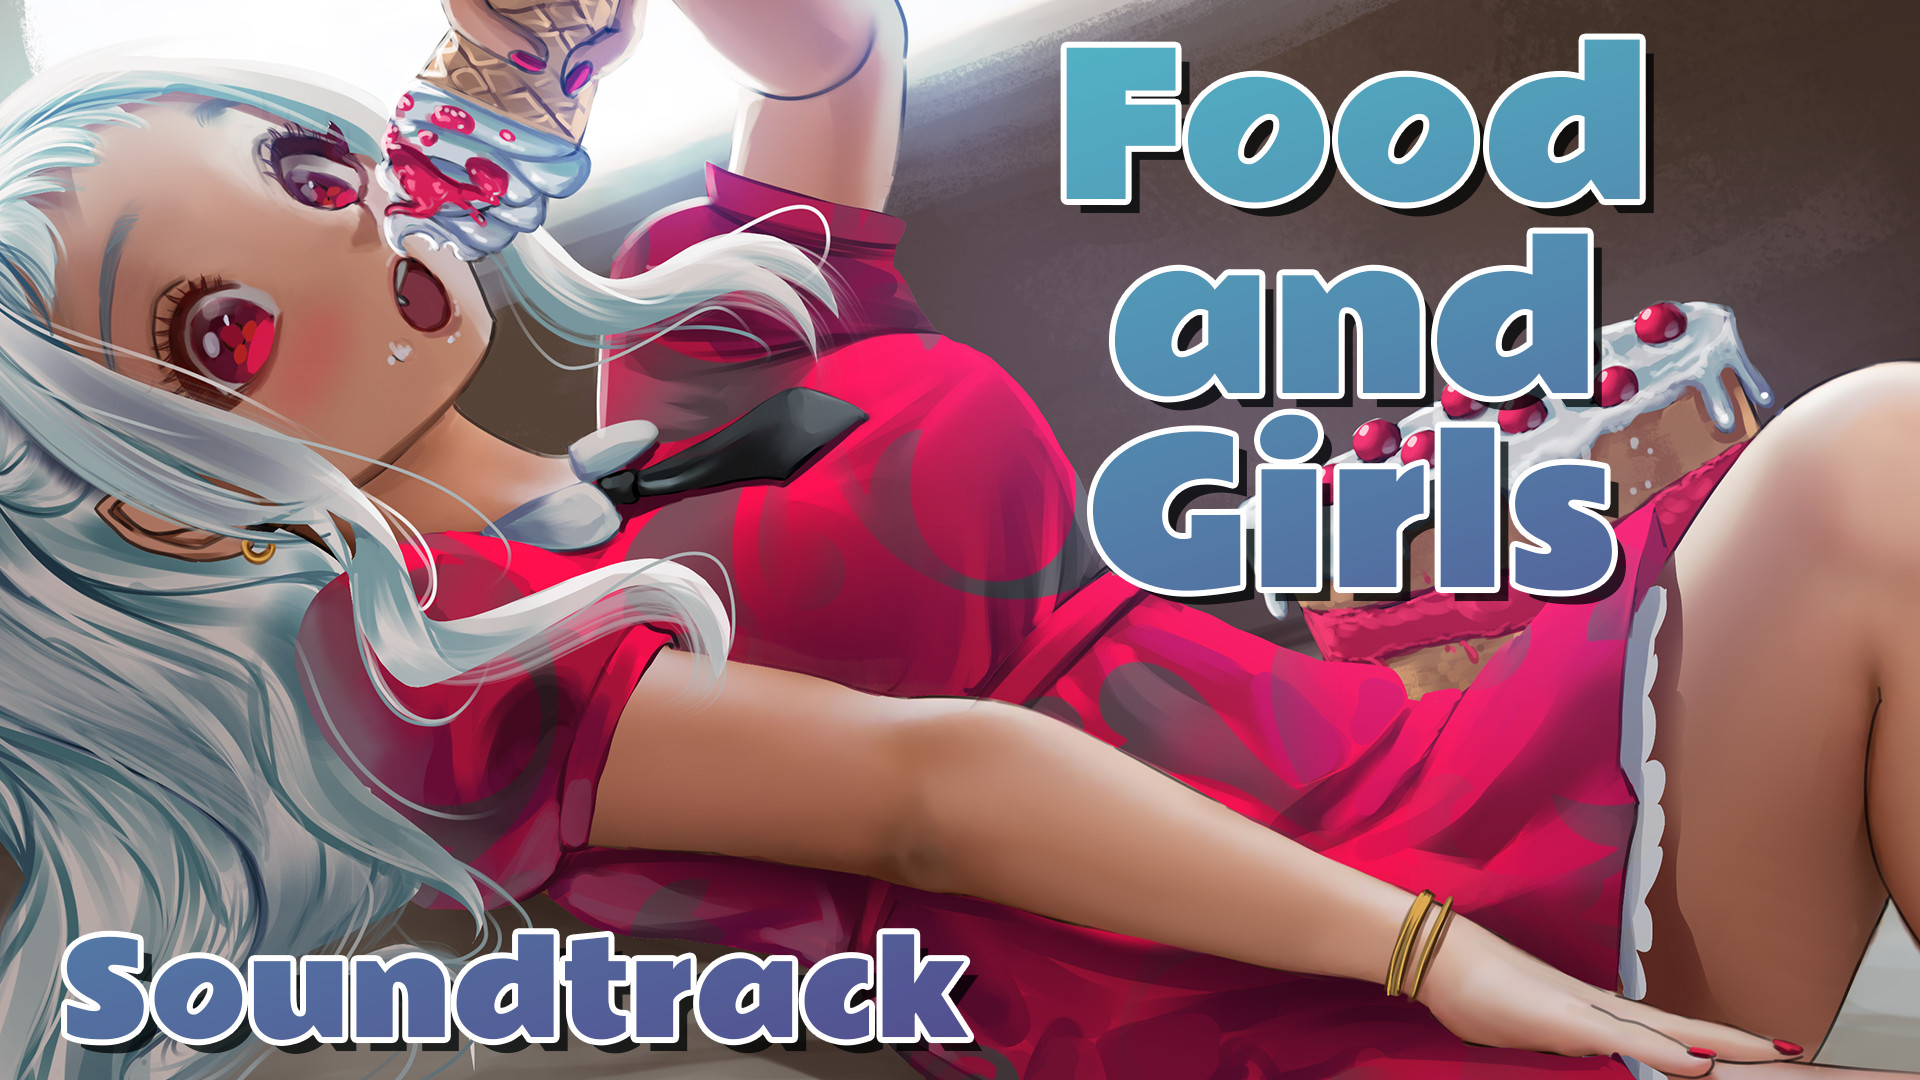 Food and Girls Soundtrack Featured Screenshot #1